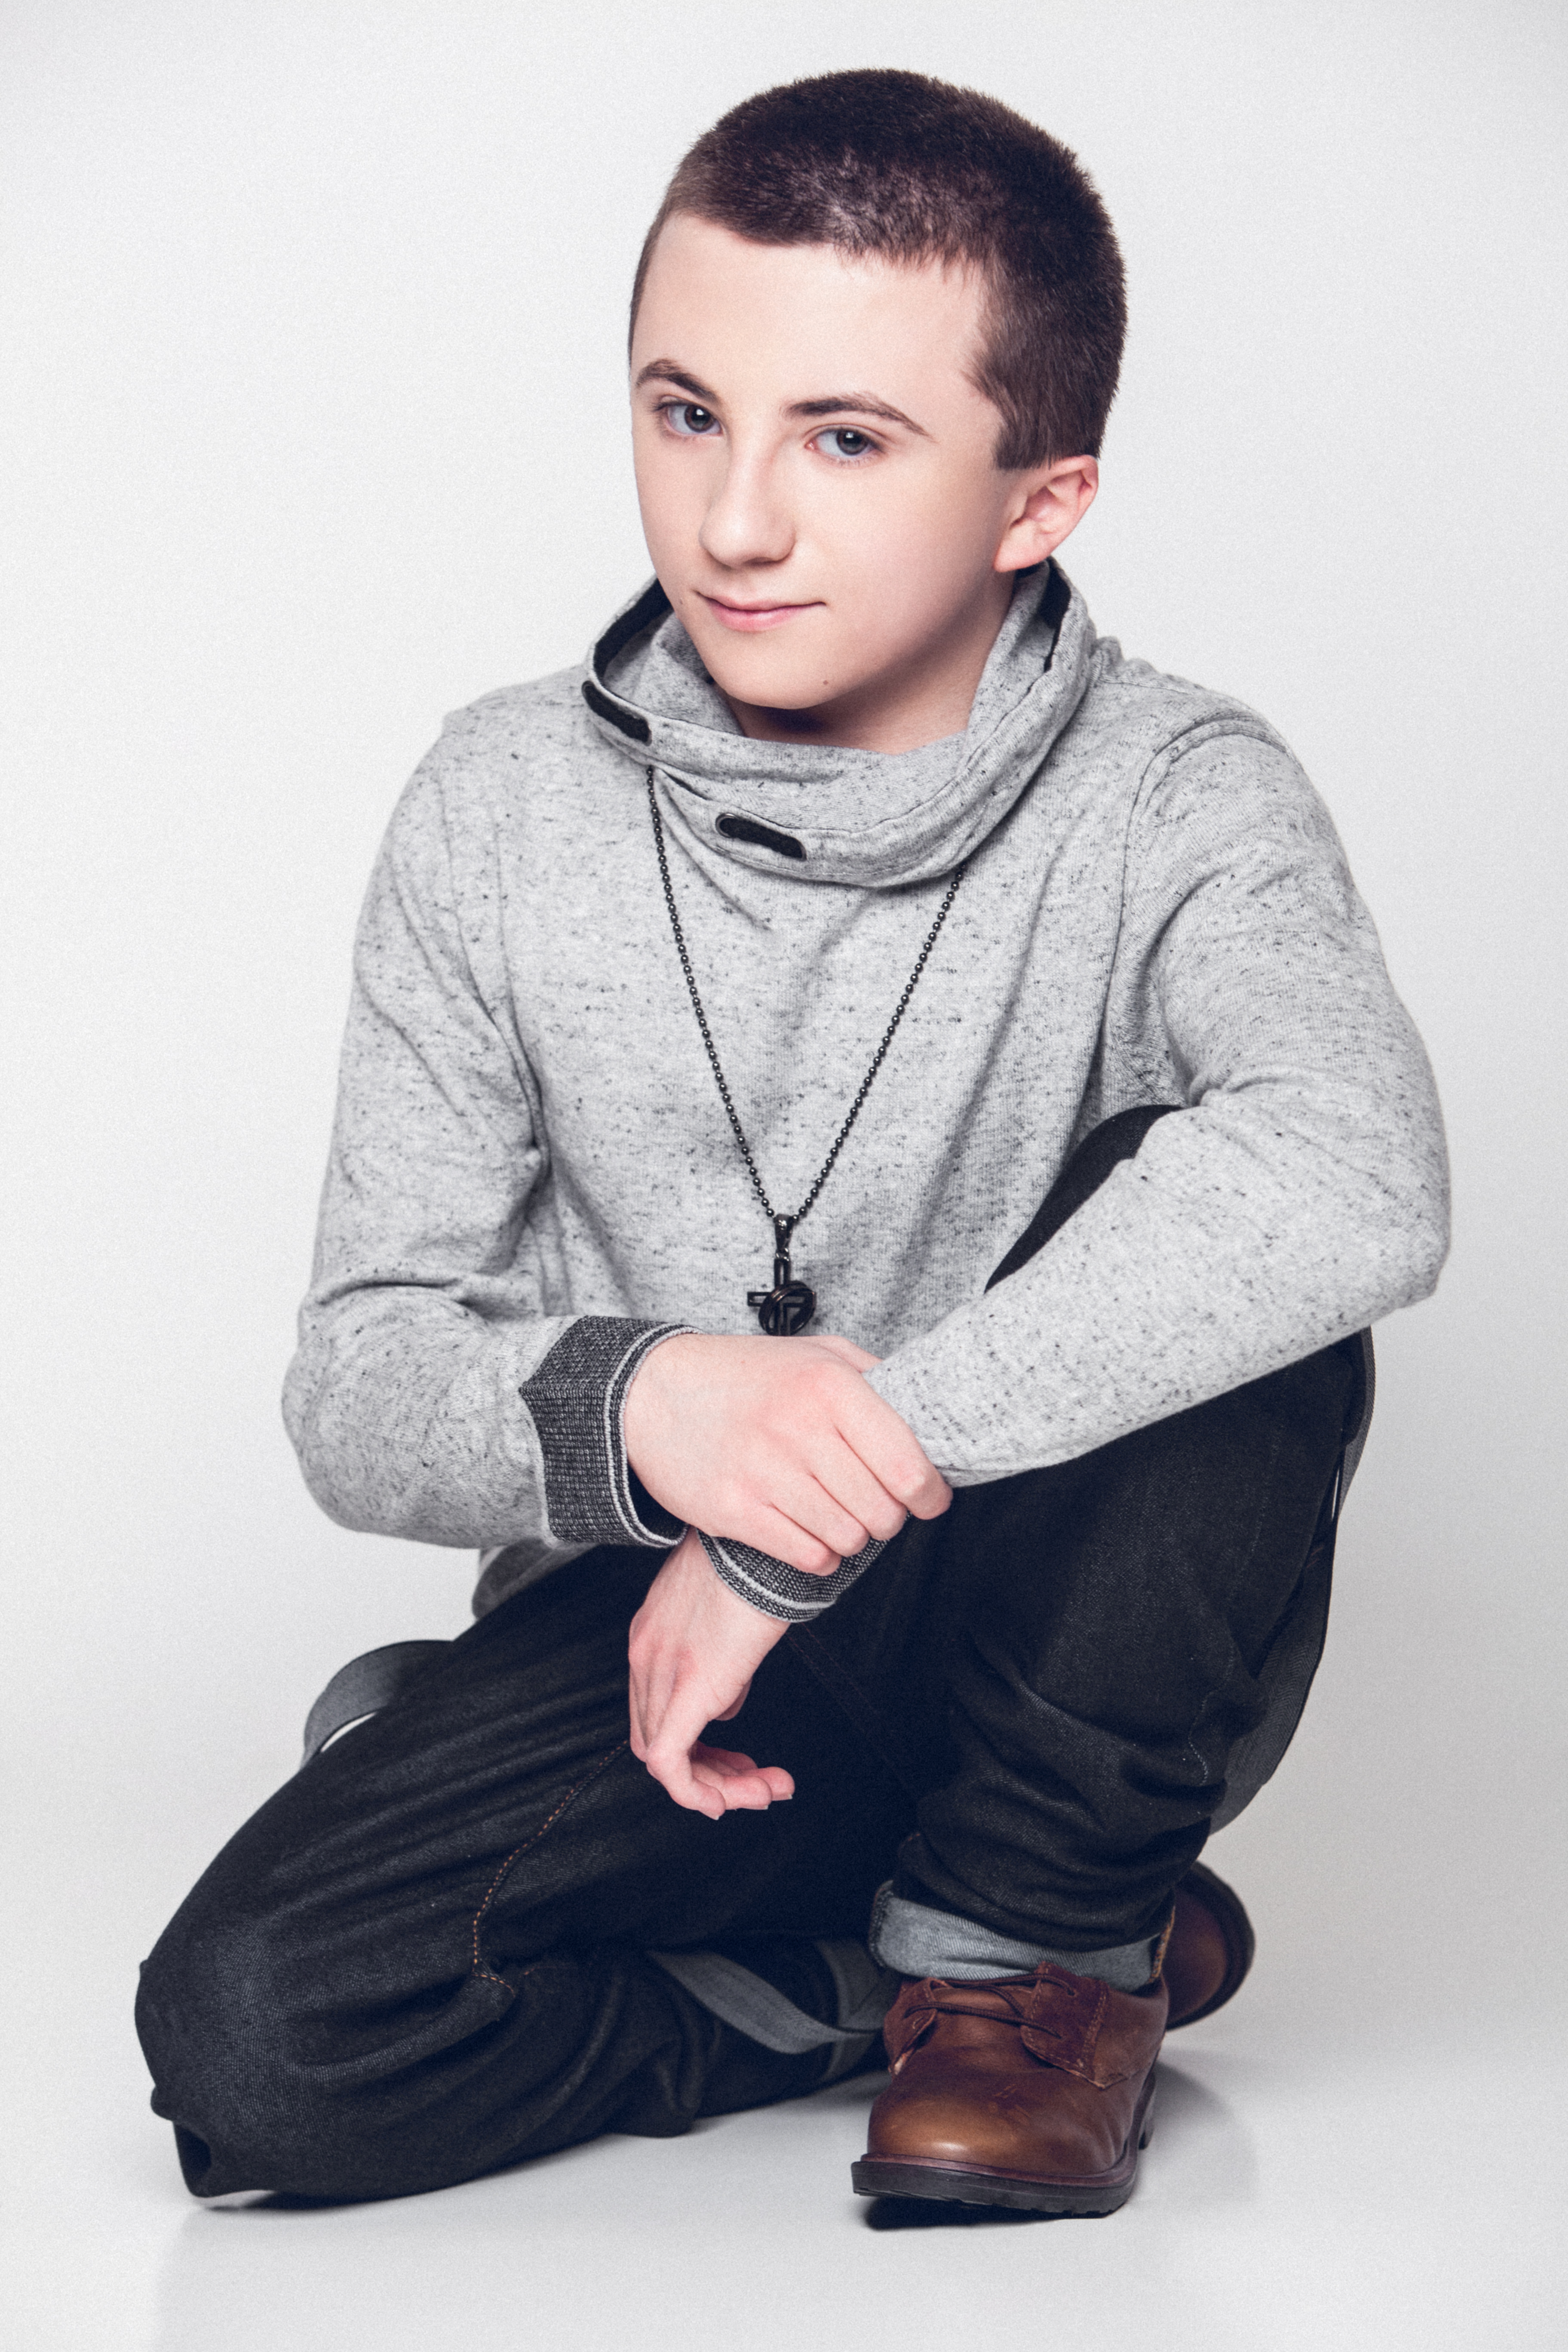 How rich is Atticus Shaffer in 2022? - How rich is Atticus S